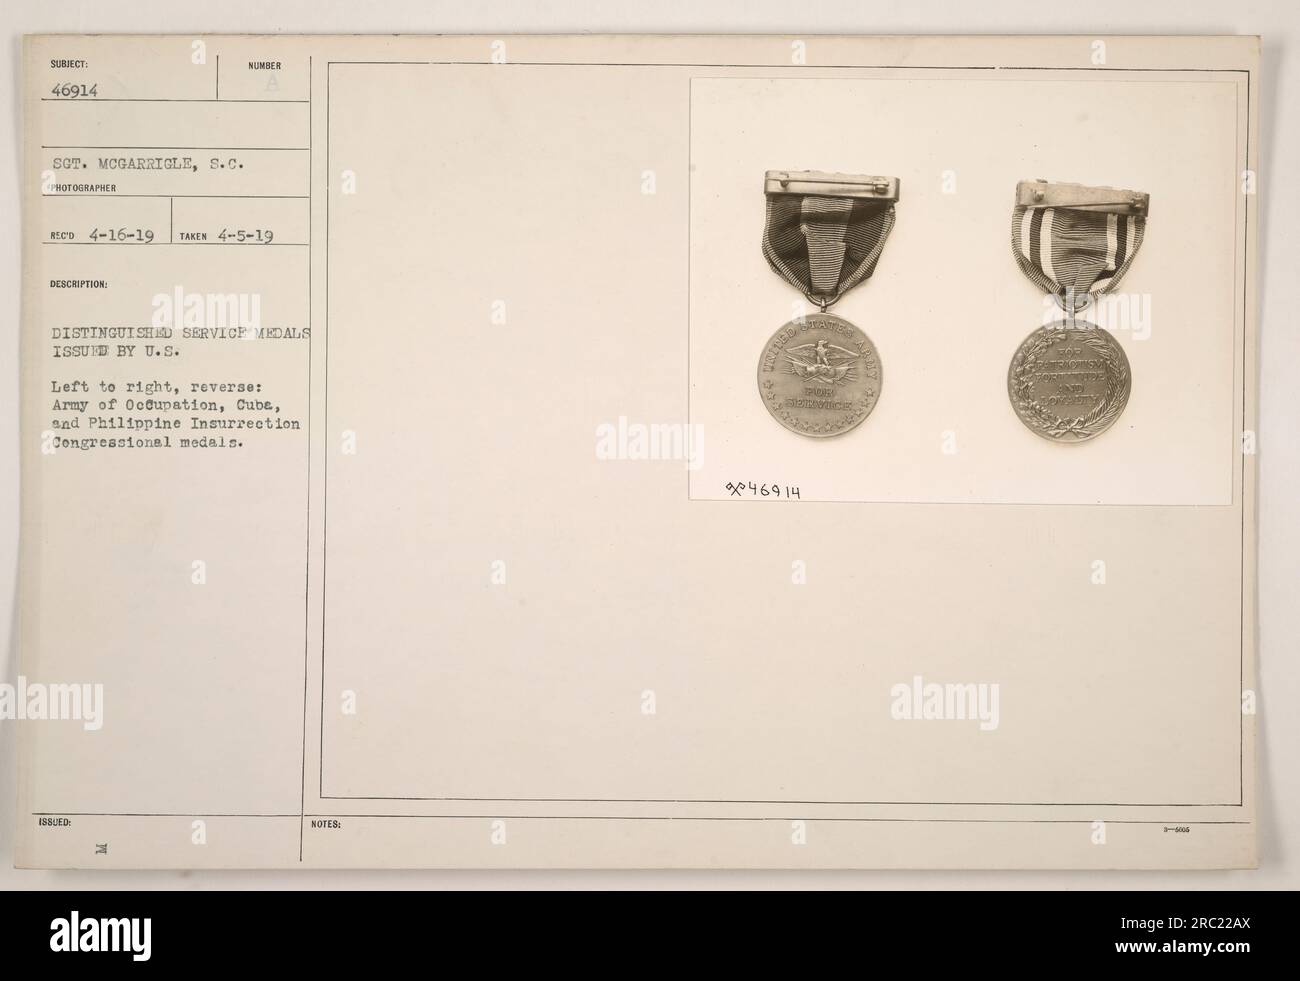 Left to right, reverse: This photograph displays three distinguished service medals issued by the U.S. military. The first medal, on the left, is the Army of Occupation Congressional Medal. In the middle, we have the Cuba Congressional Medal. Lastly, on the right, is the Philippine Insurrection Congressional Medal. Stock Photo